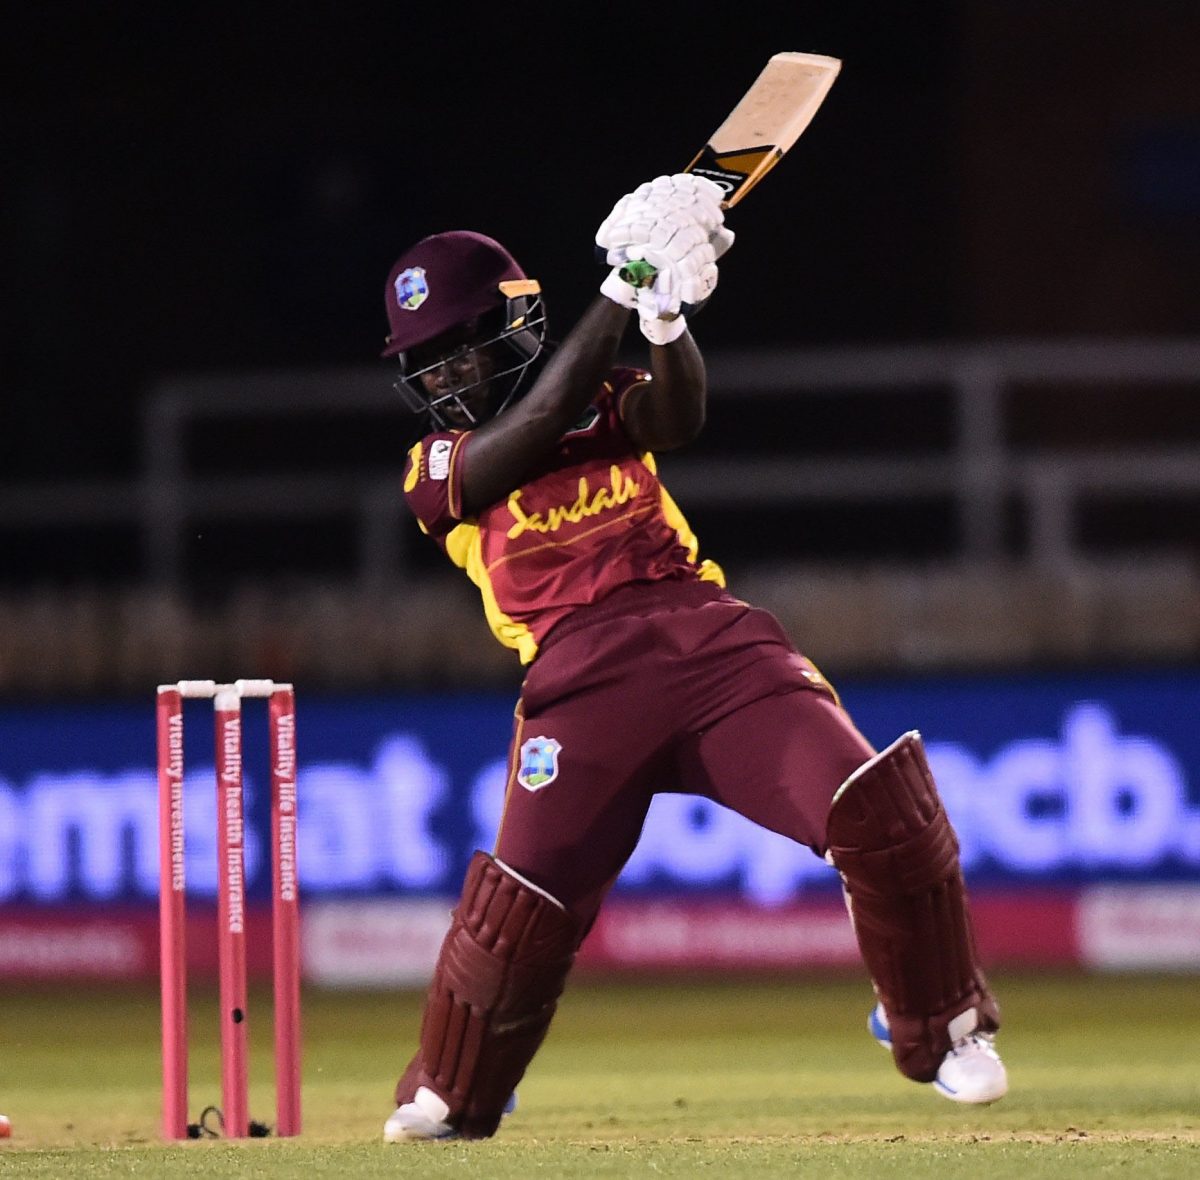 Deandra Dottin top scored for West Indies Women in the first match of the T20I series versus England Women on Monday.